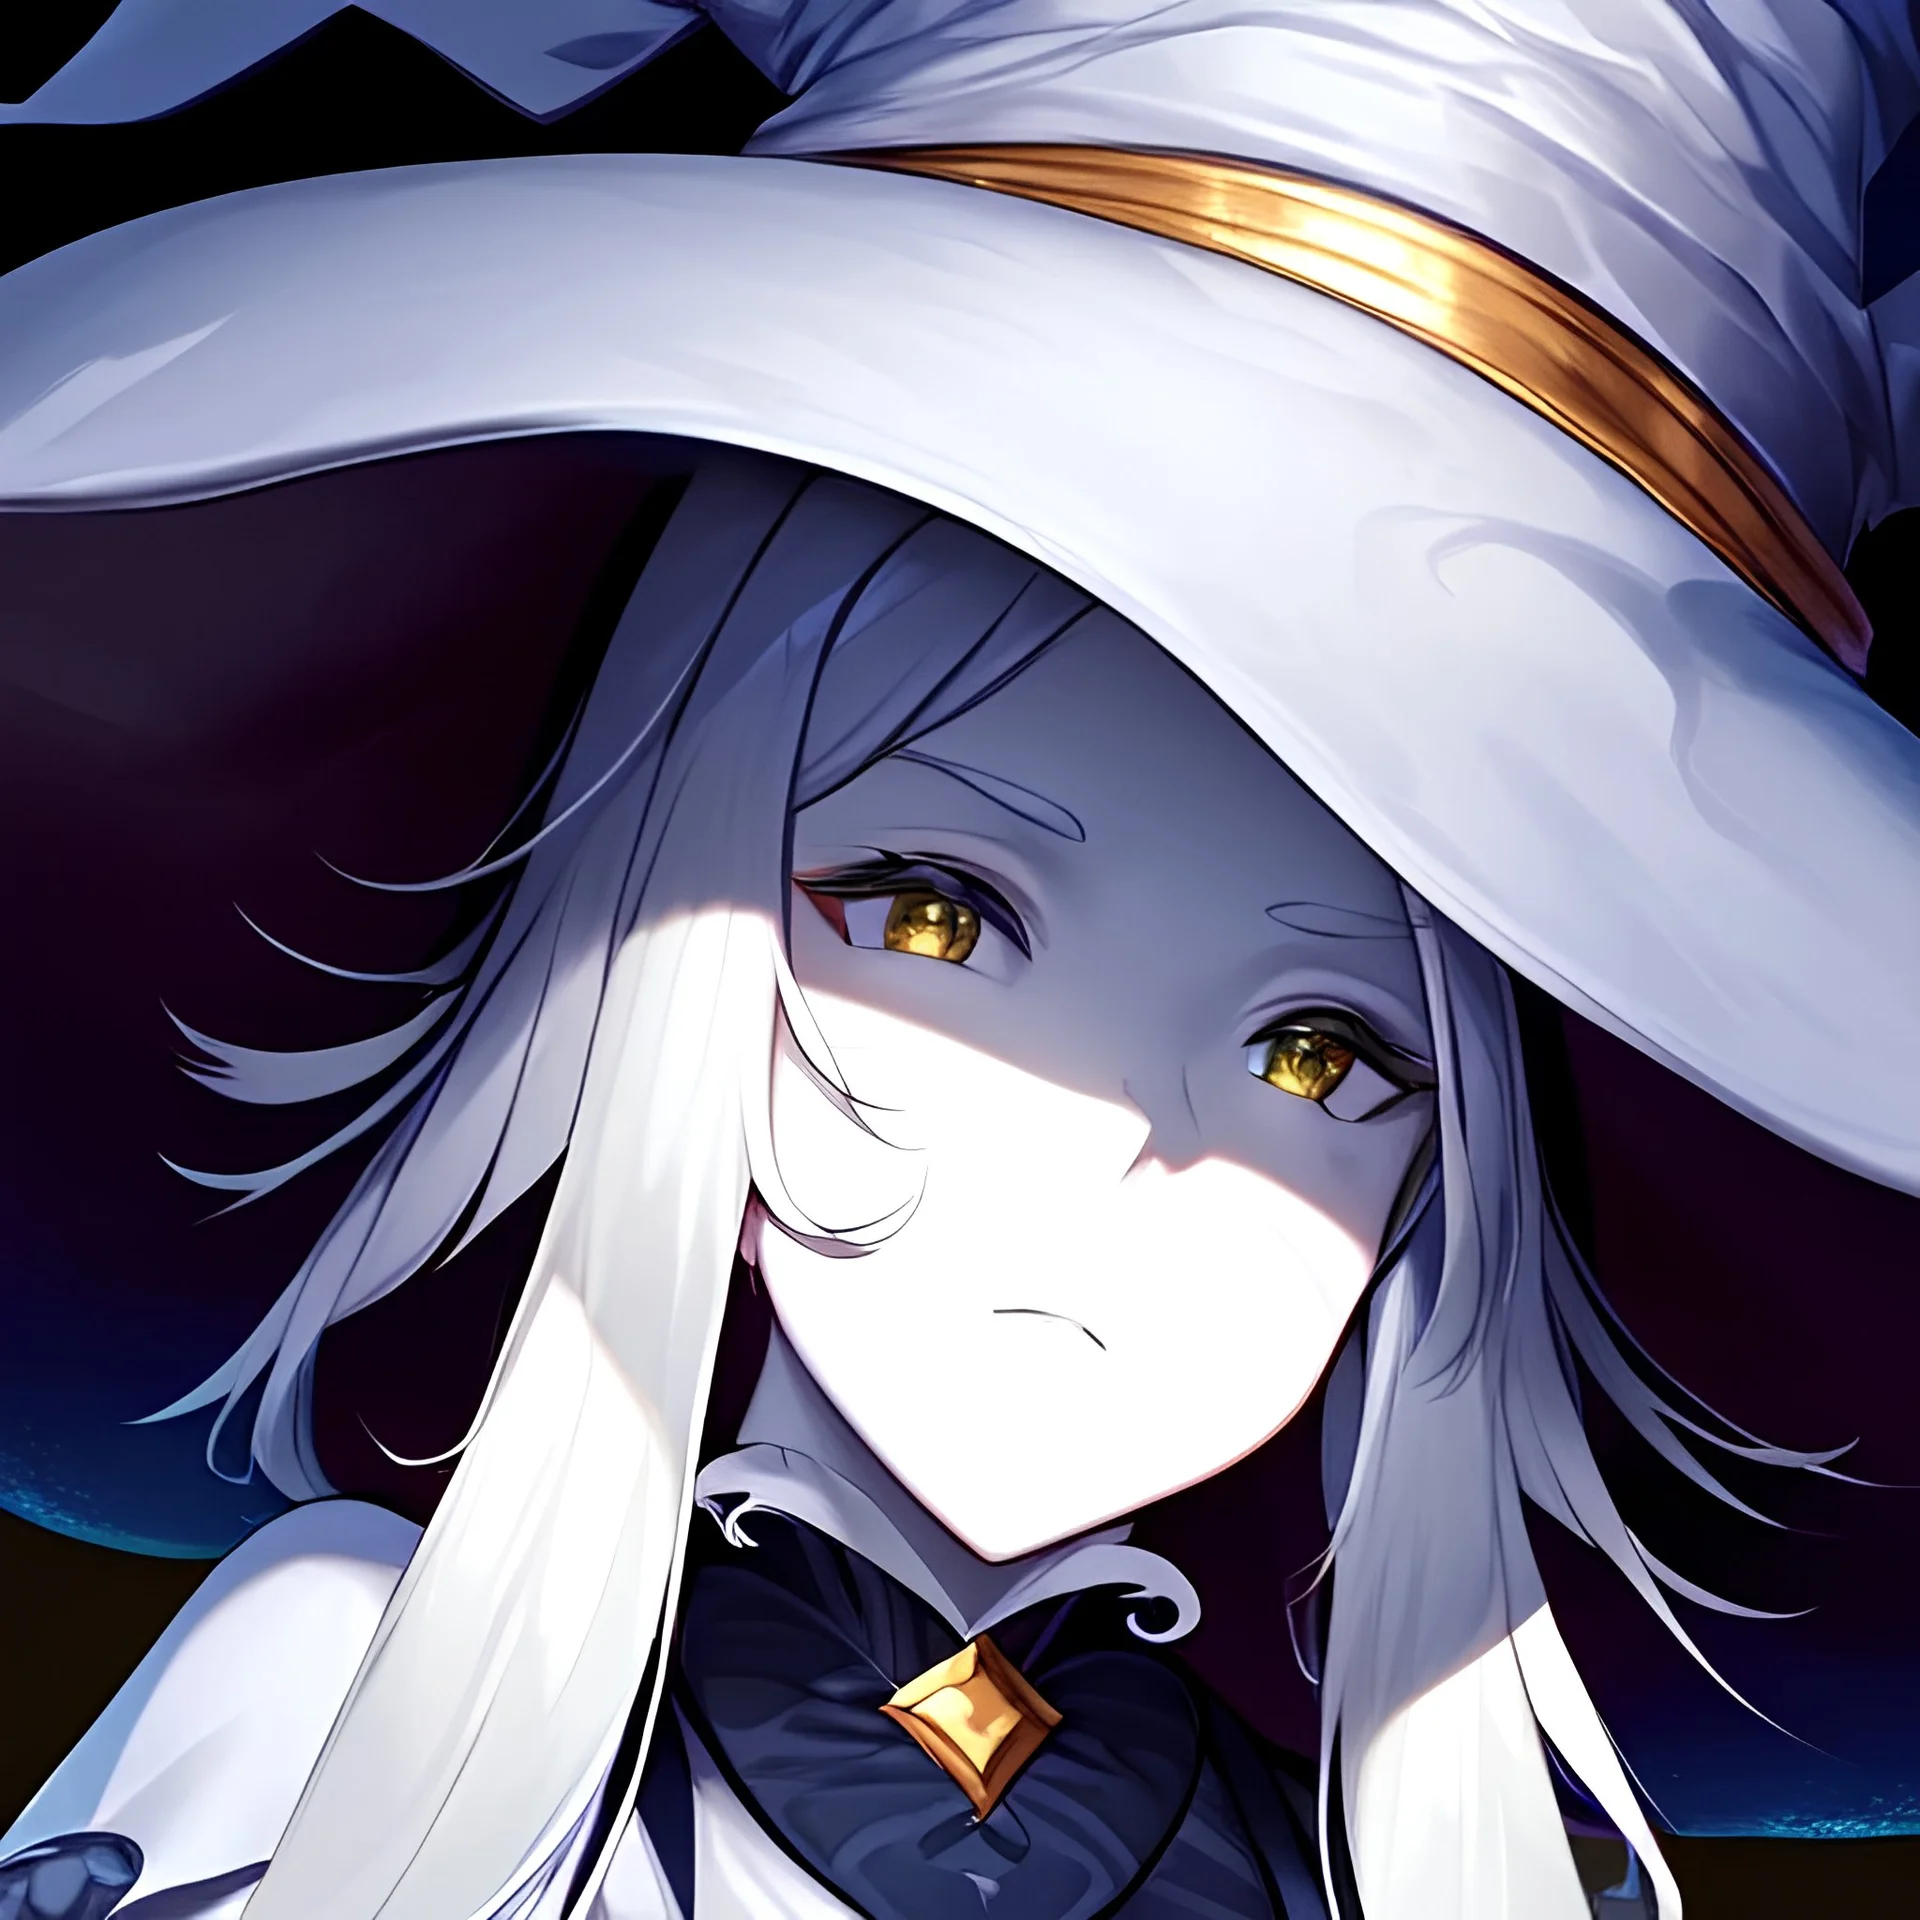 goddes with huge hat, witch, portrait, hd, cute, white skin